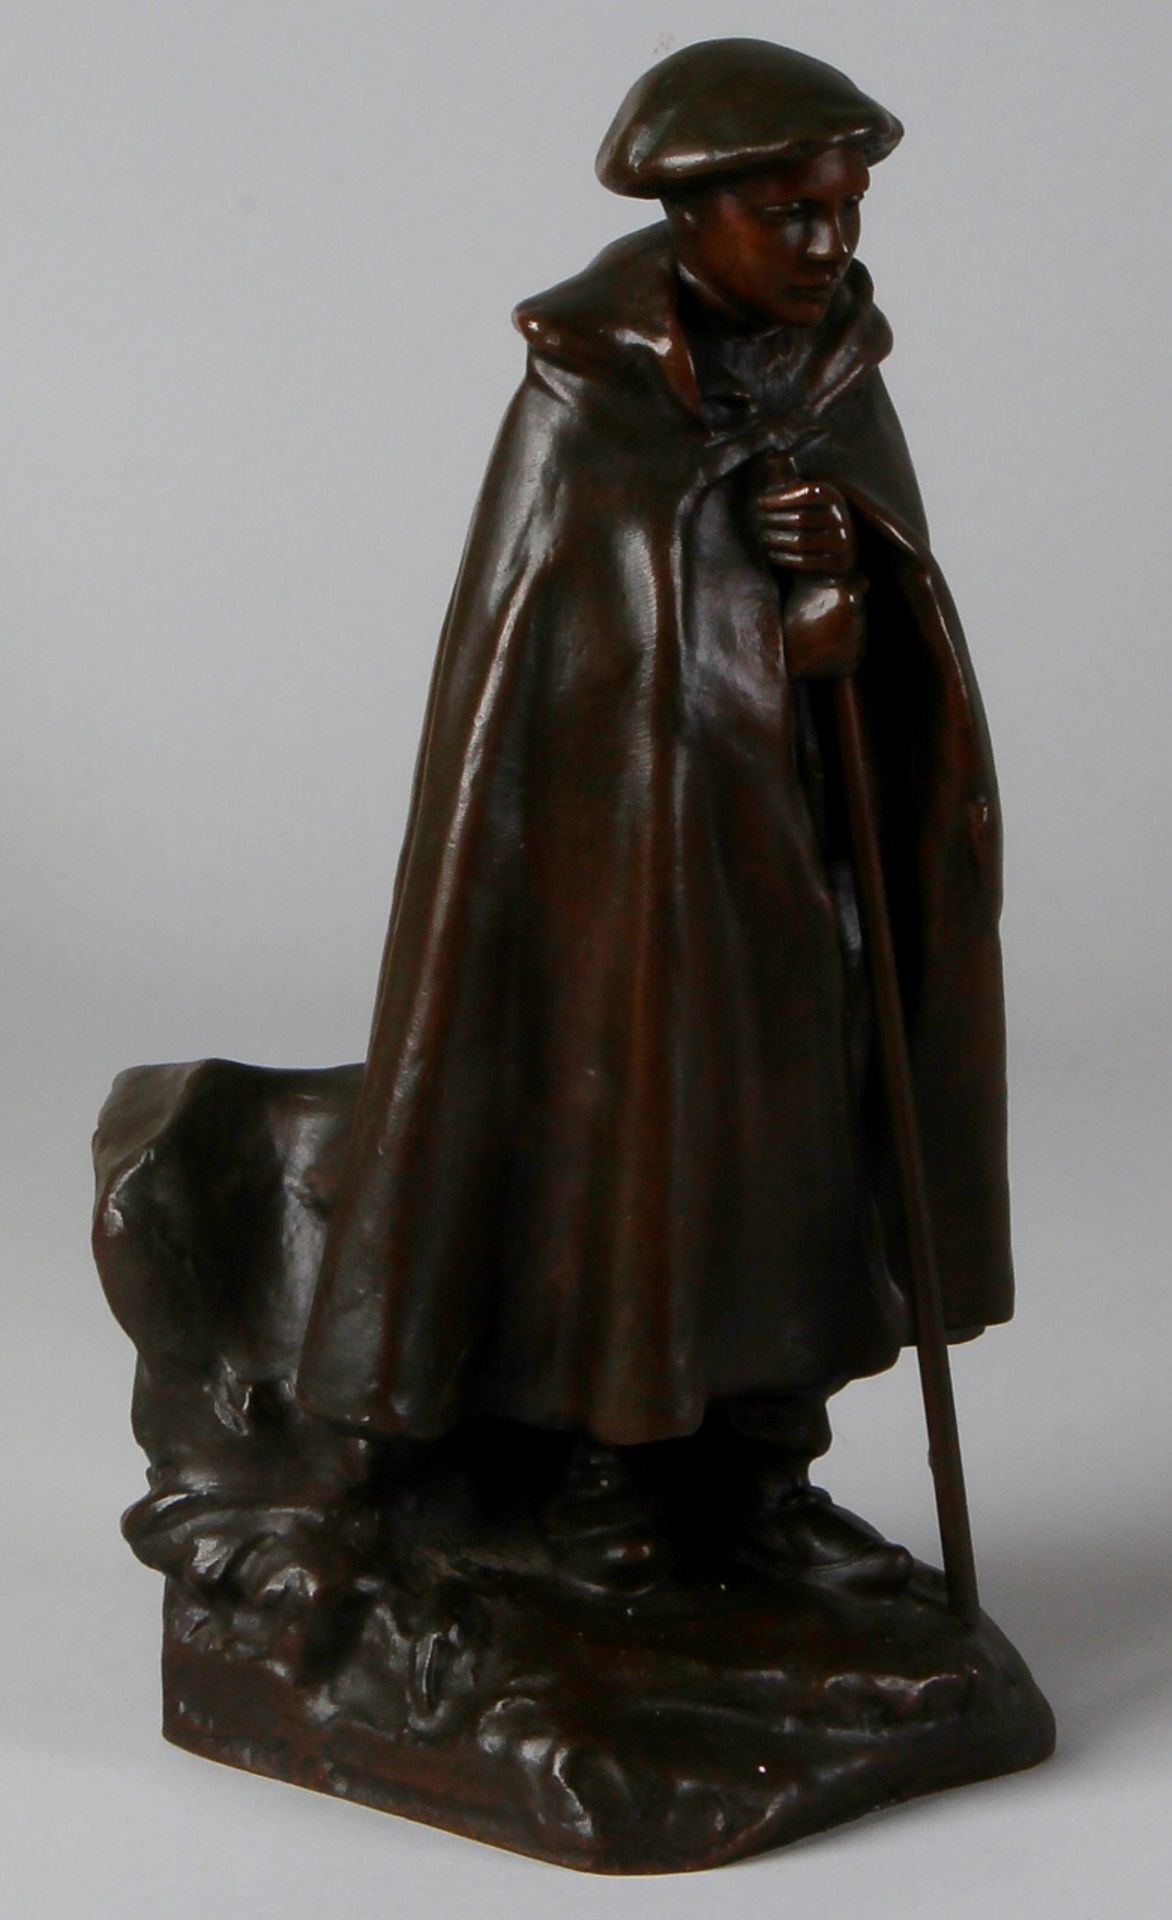 Antique bronze figure from around 1900 depicting a shepherd with jacket by J. Mengue, Jean Marie